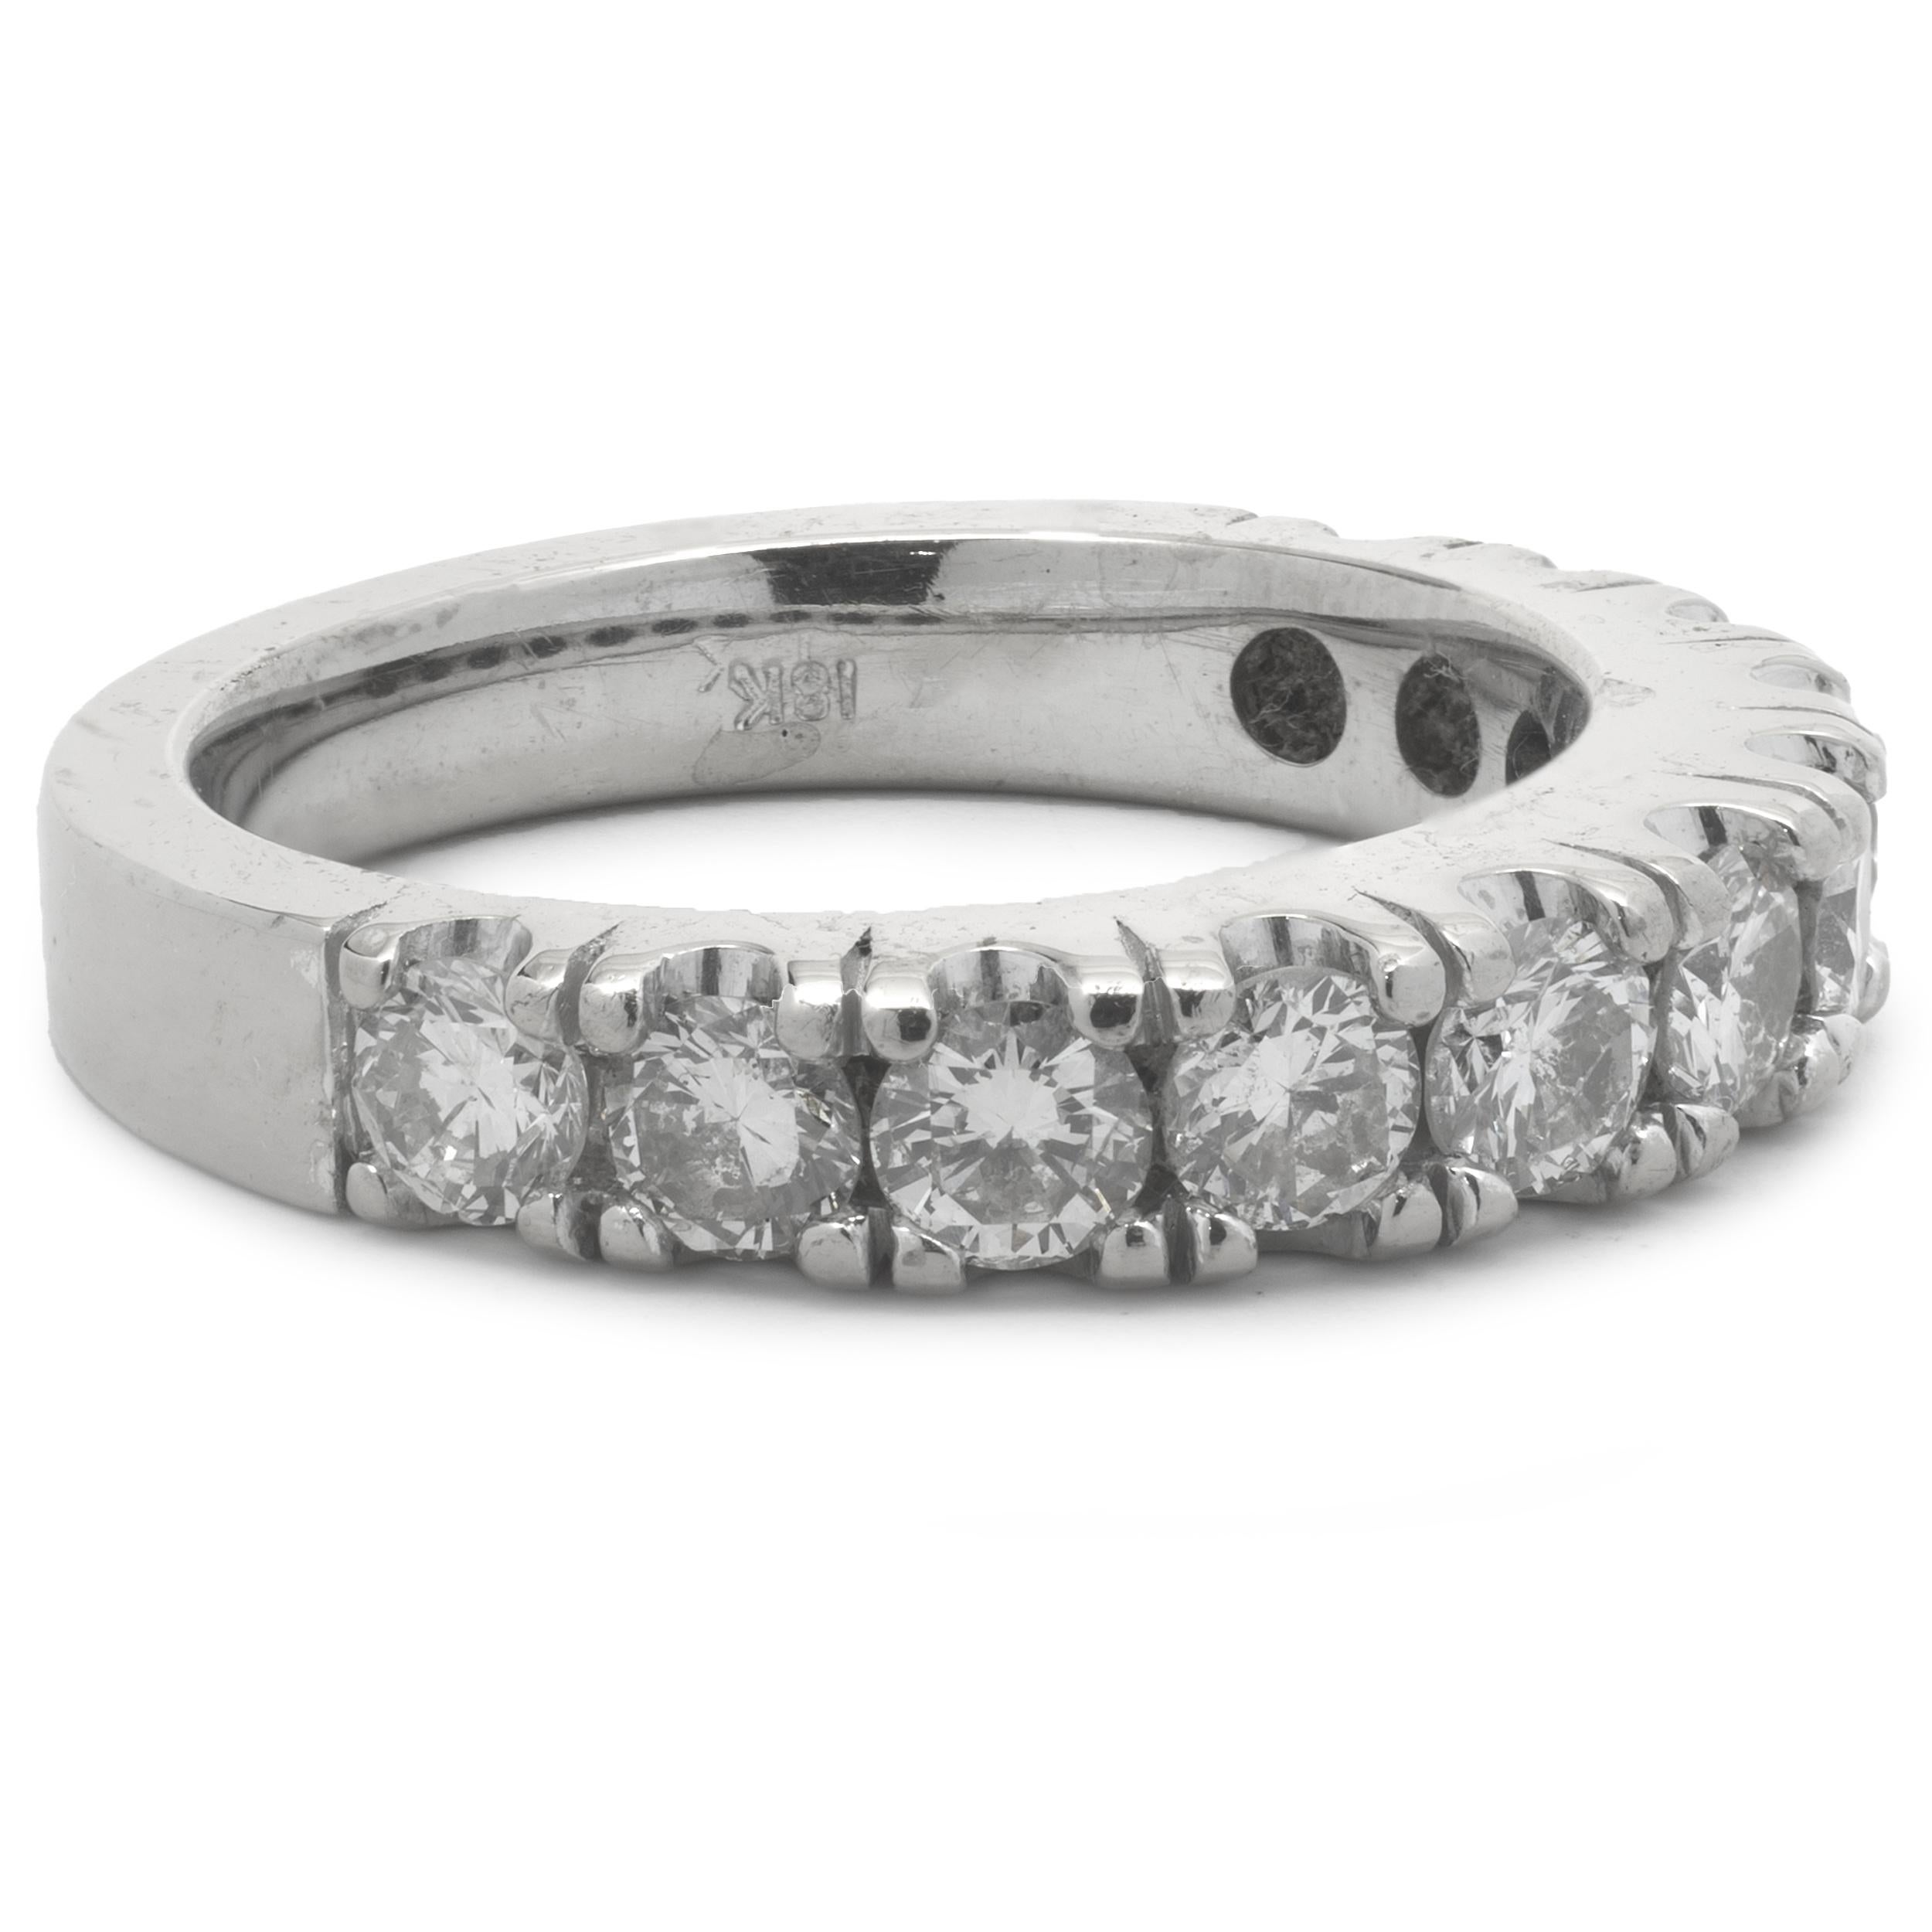 Designer: Custom
Material: 18K white gold
Diamonds: 11 round brilliant cut = 1.00cttw
Color: H/I
Clarity: VS2
Size: 5.25 complimentary sizing available
Dimensions: ring measures 4mm in width
Weight: 6.43 grams
